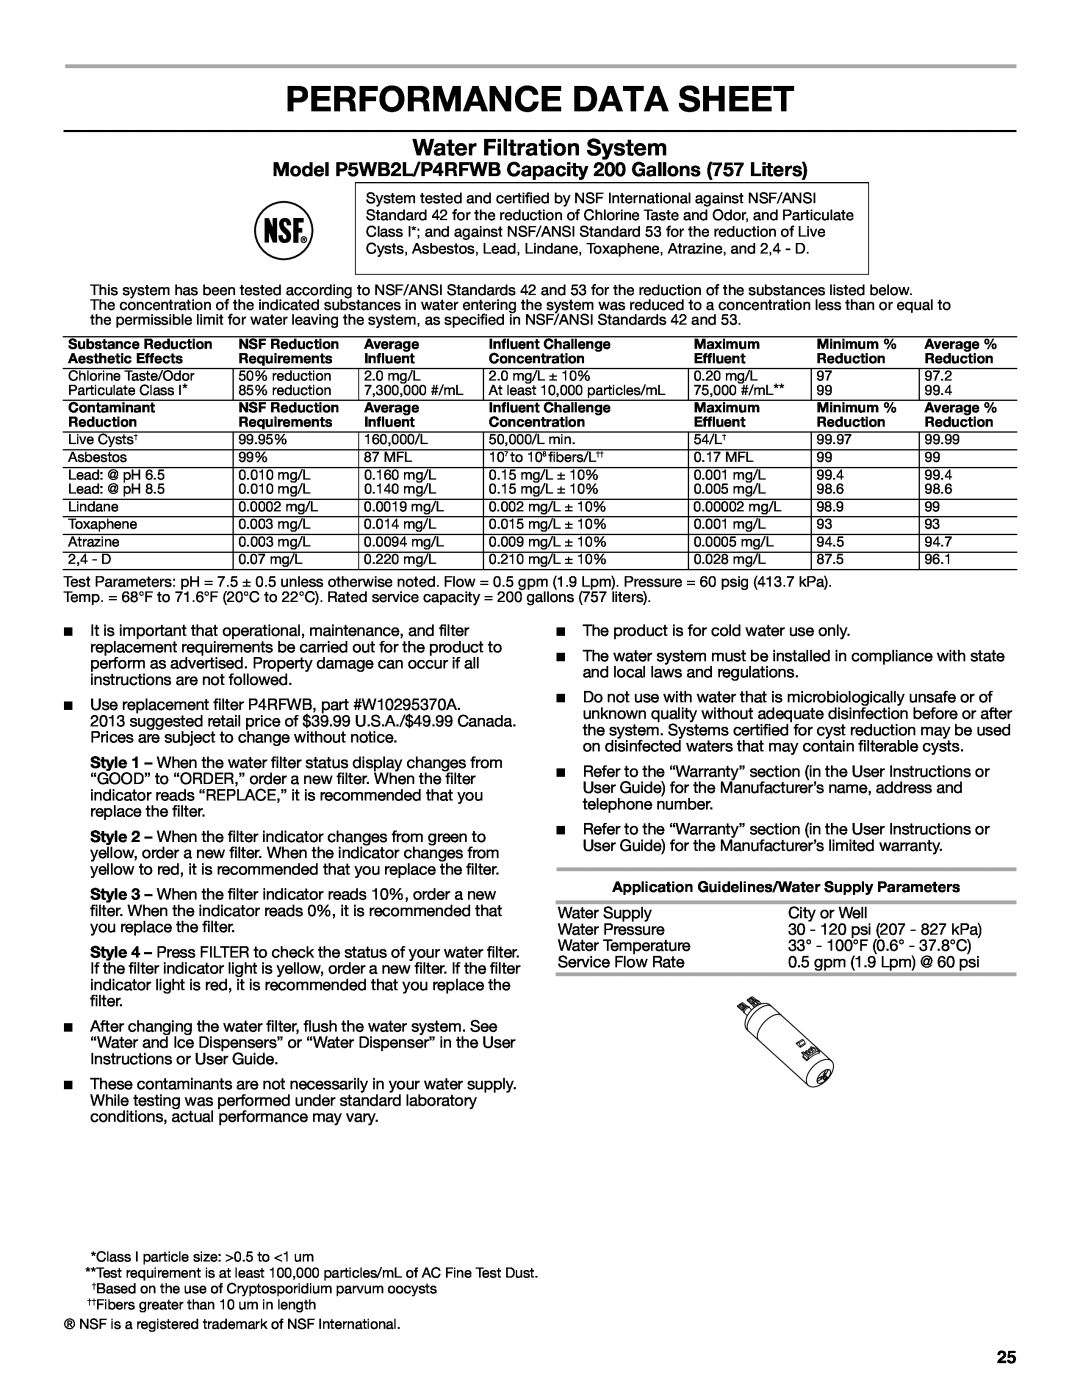 Whirlpool W10632883A Performance Data Sheet, Water Filtration System, Model P5WB2L/P4RFWB Capacity 200 Gallons 757 Liters 